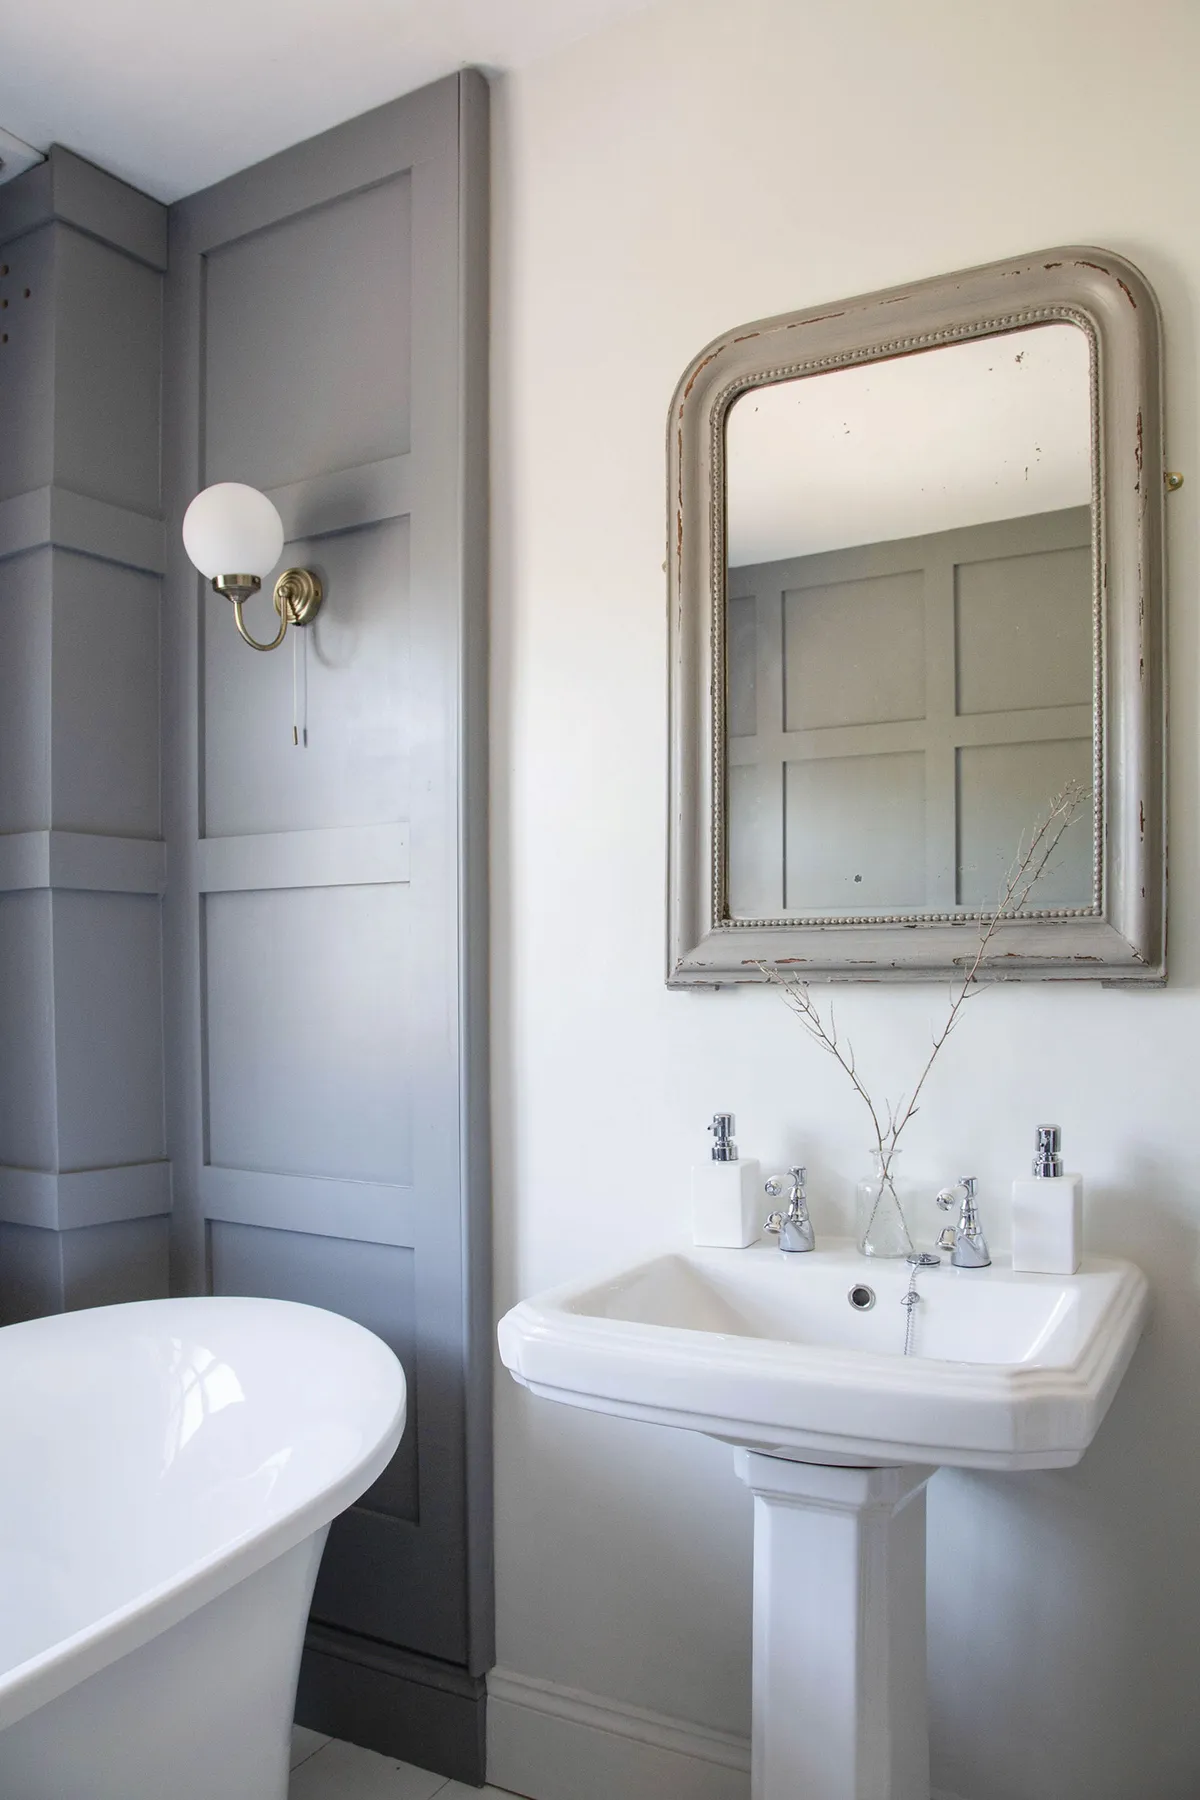 Vicky stays true to the property’s age with traditional fixtures in the bathroom, including a bevelled-edge sink, classic chrome taps and a vintage-look wall light fitting